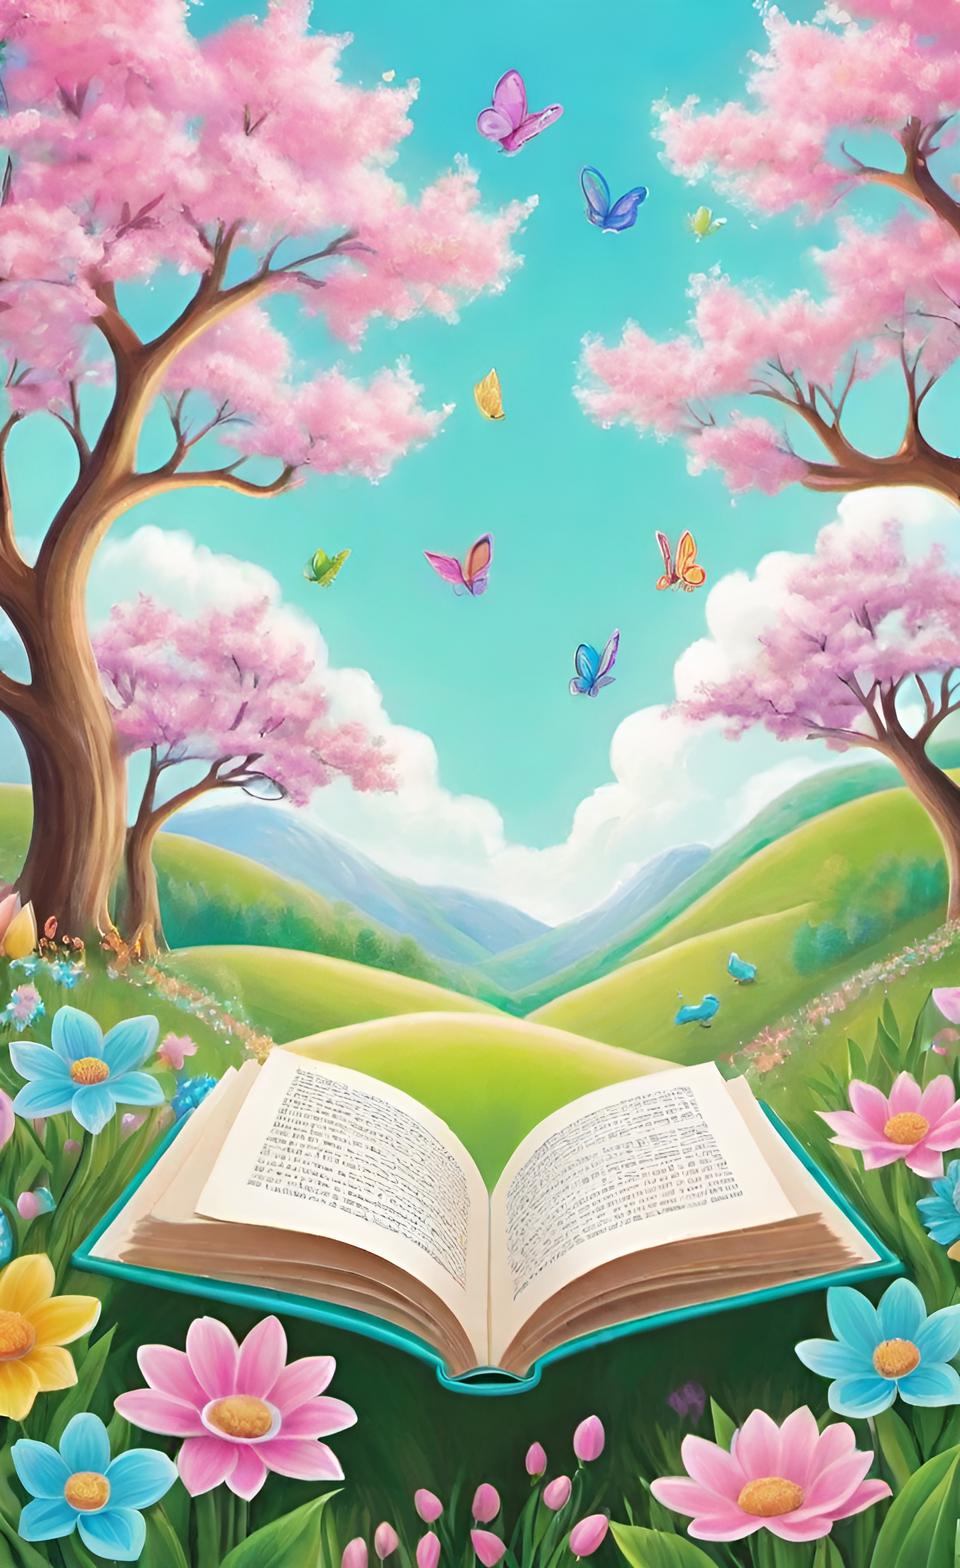 Book in a spring fields with flowers, butterflies, pink trees, and mountains